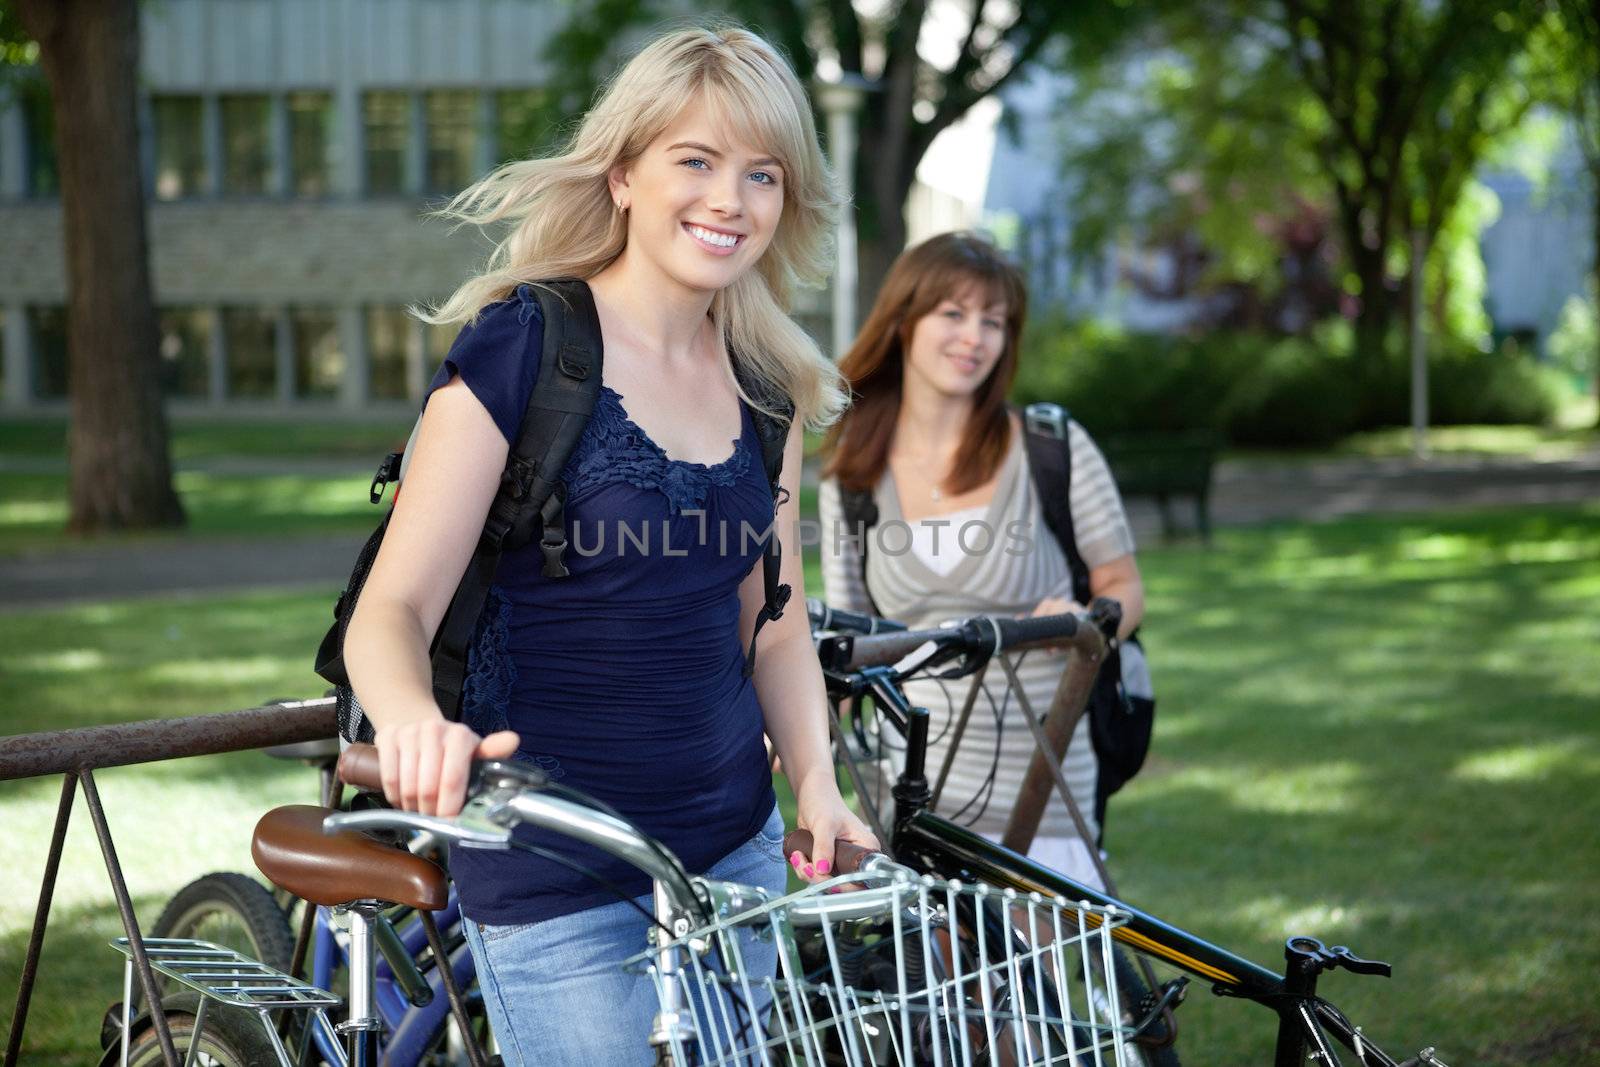 College students standing with bicycle on college campus lawn